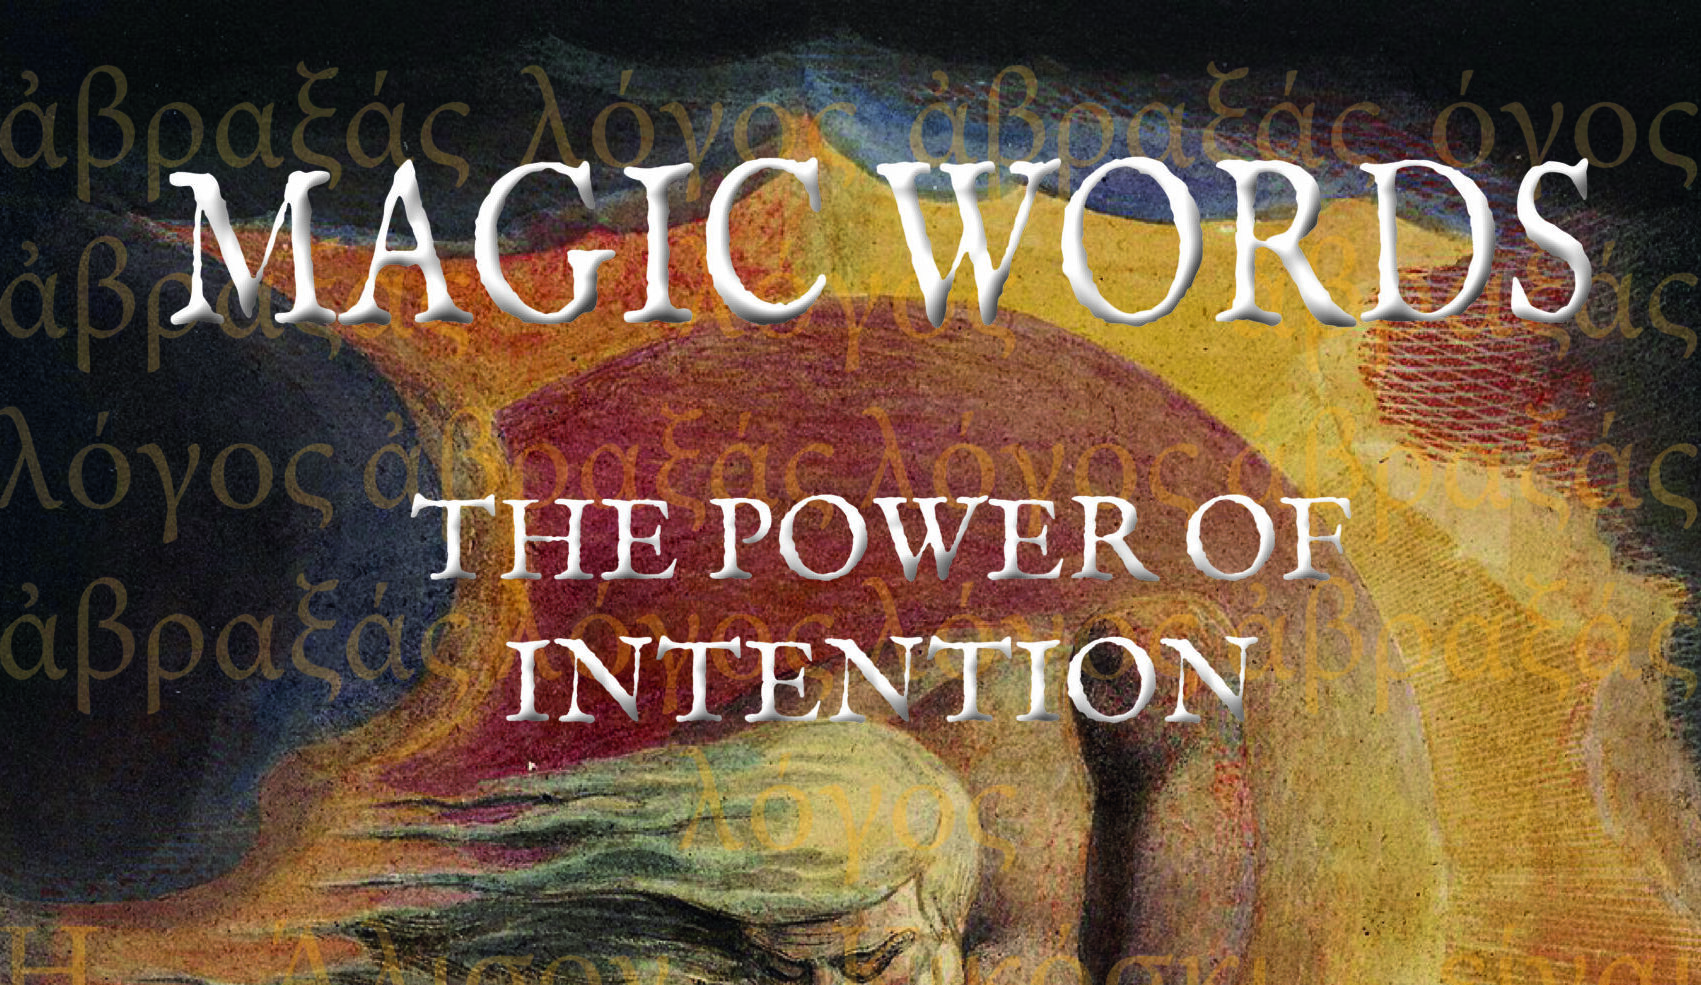 Magic words by I. Alejandro Virgilio is out now